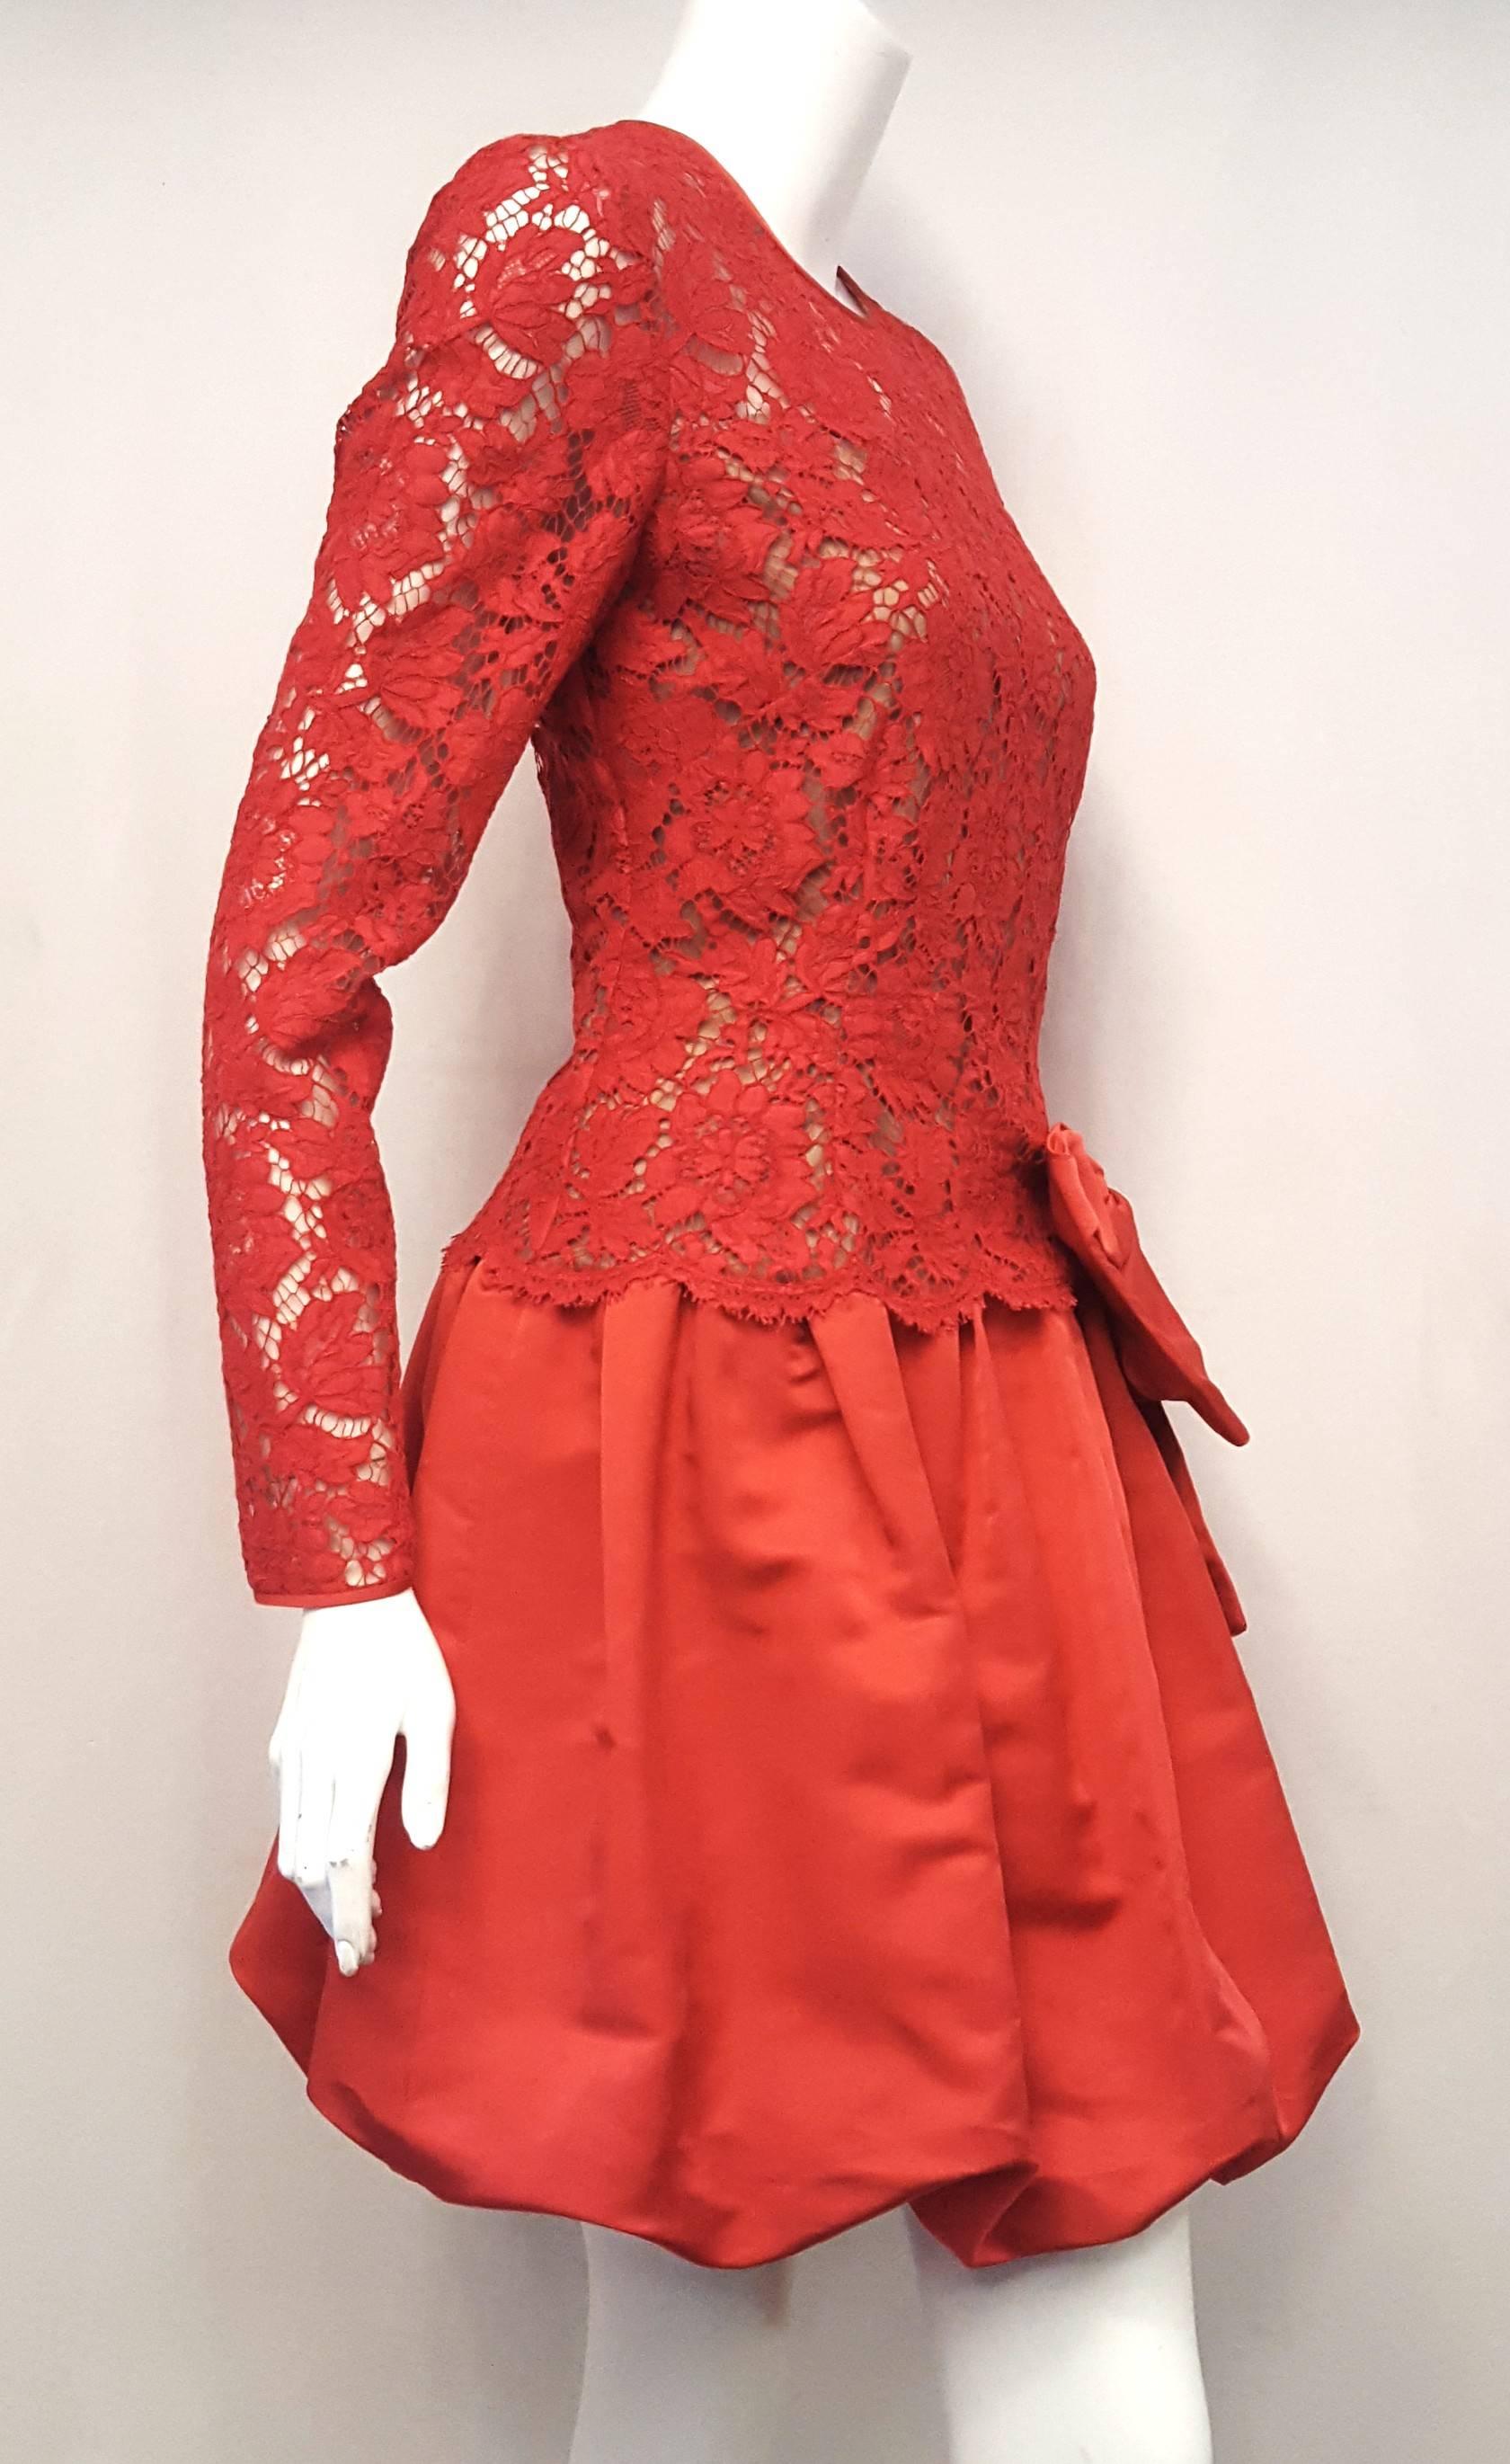 Valentino vibrant red sheer lace dress with oversized side bow at drop waist on satin bubble skirt makes a dramatic statement!.   This dress was created on the 50th anniversary of the iconic Valentino fashion house.  This red lace and silk satin